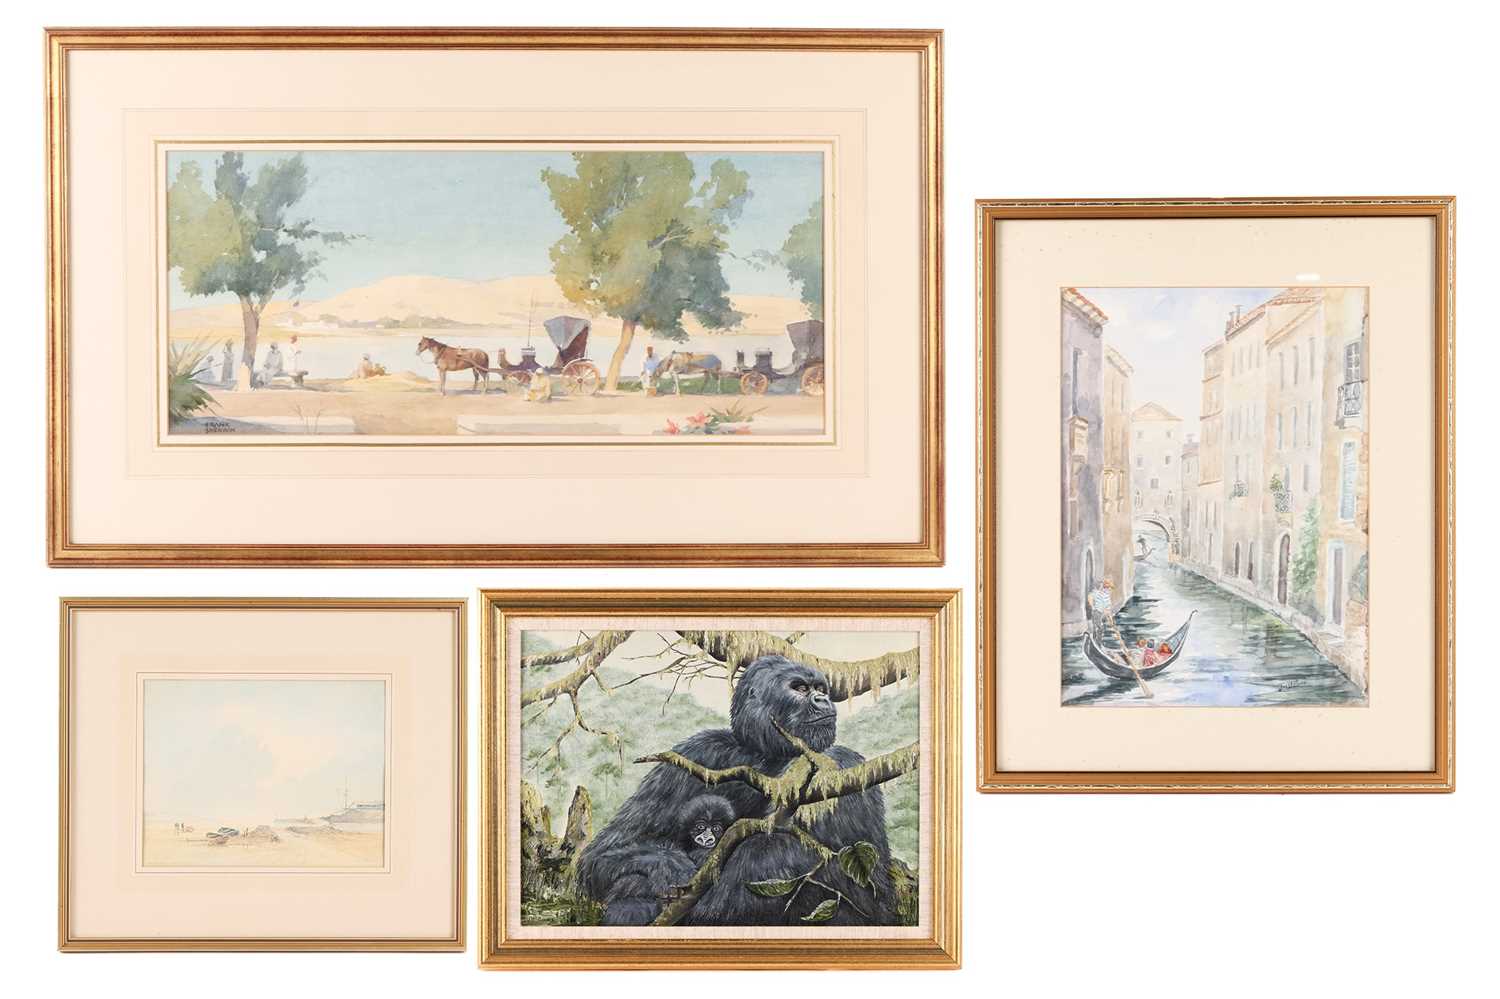 Frank Sherwin (1896-1985), "Arab Carriages, Luxor", signed 'Frank Sherwin' (lower right), watercolou